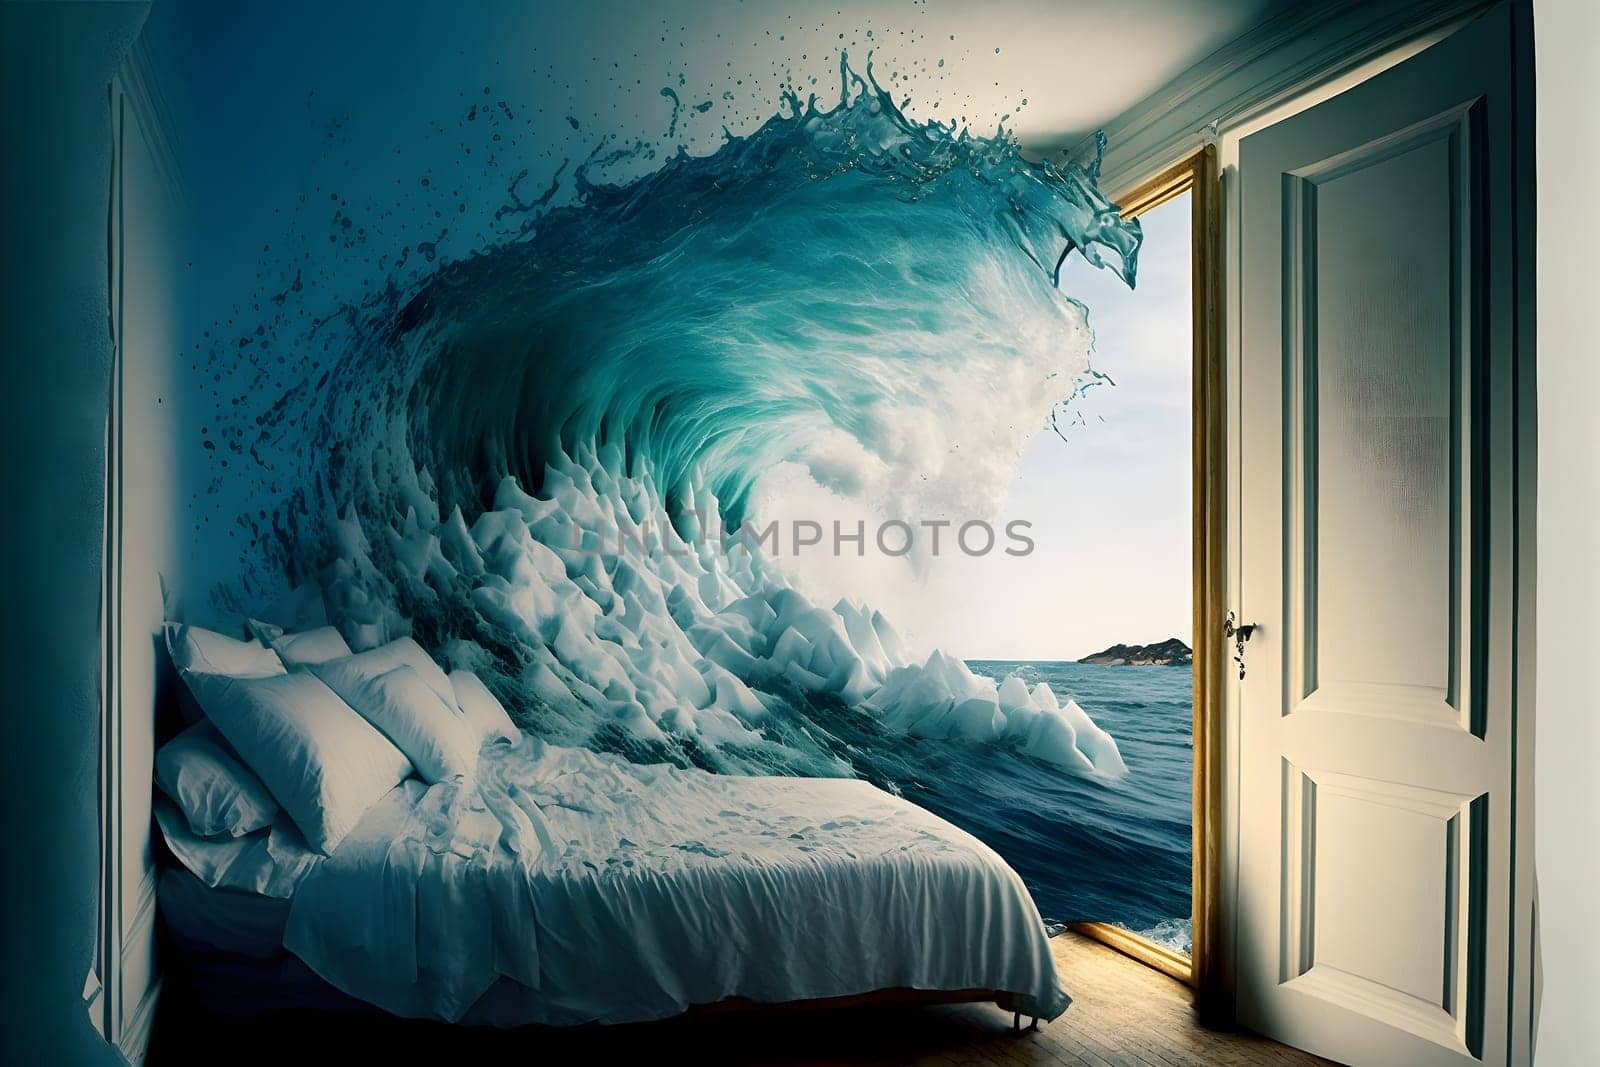 generic empty bedroom with white double bed with ocean wave is about to cover it, neural network generated art. Digitally generated image. Not based on any actual scene.